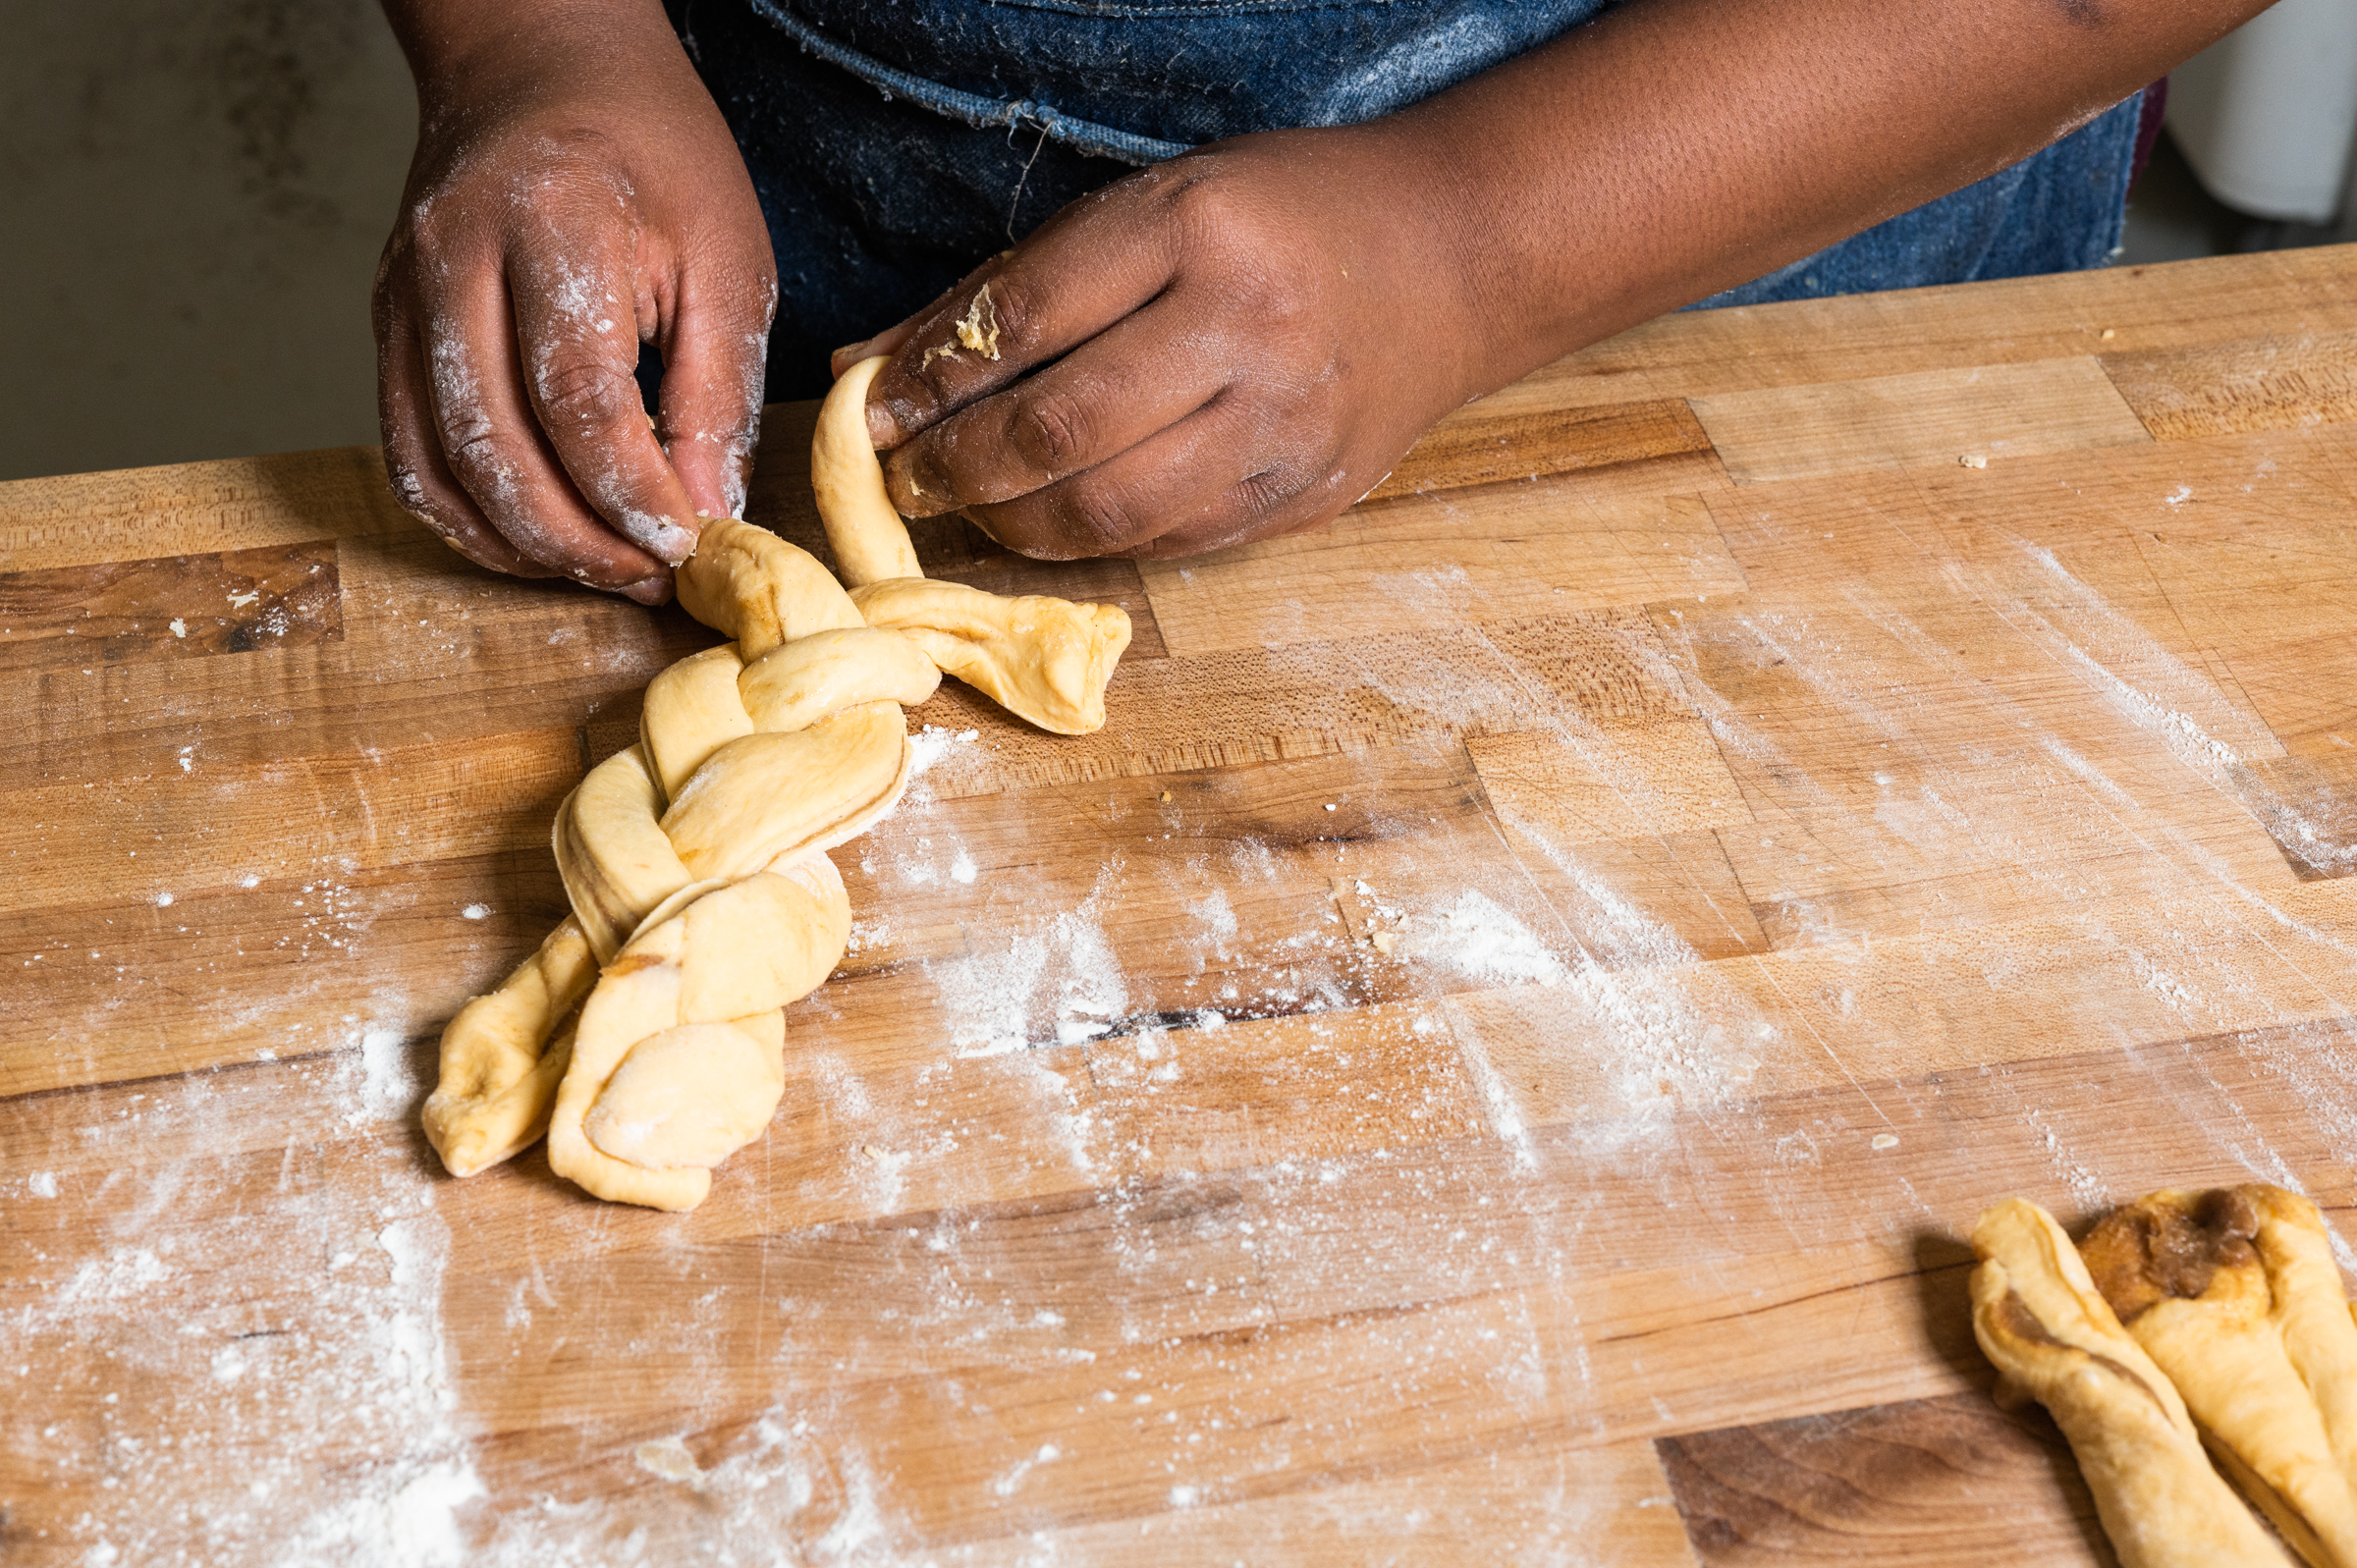 The dough is folded with the sugar mix inside, then cut into strips and braided